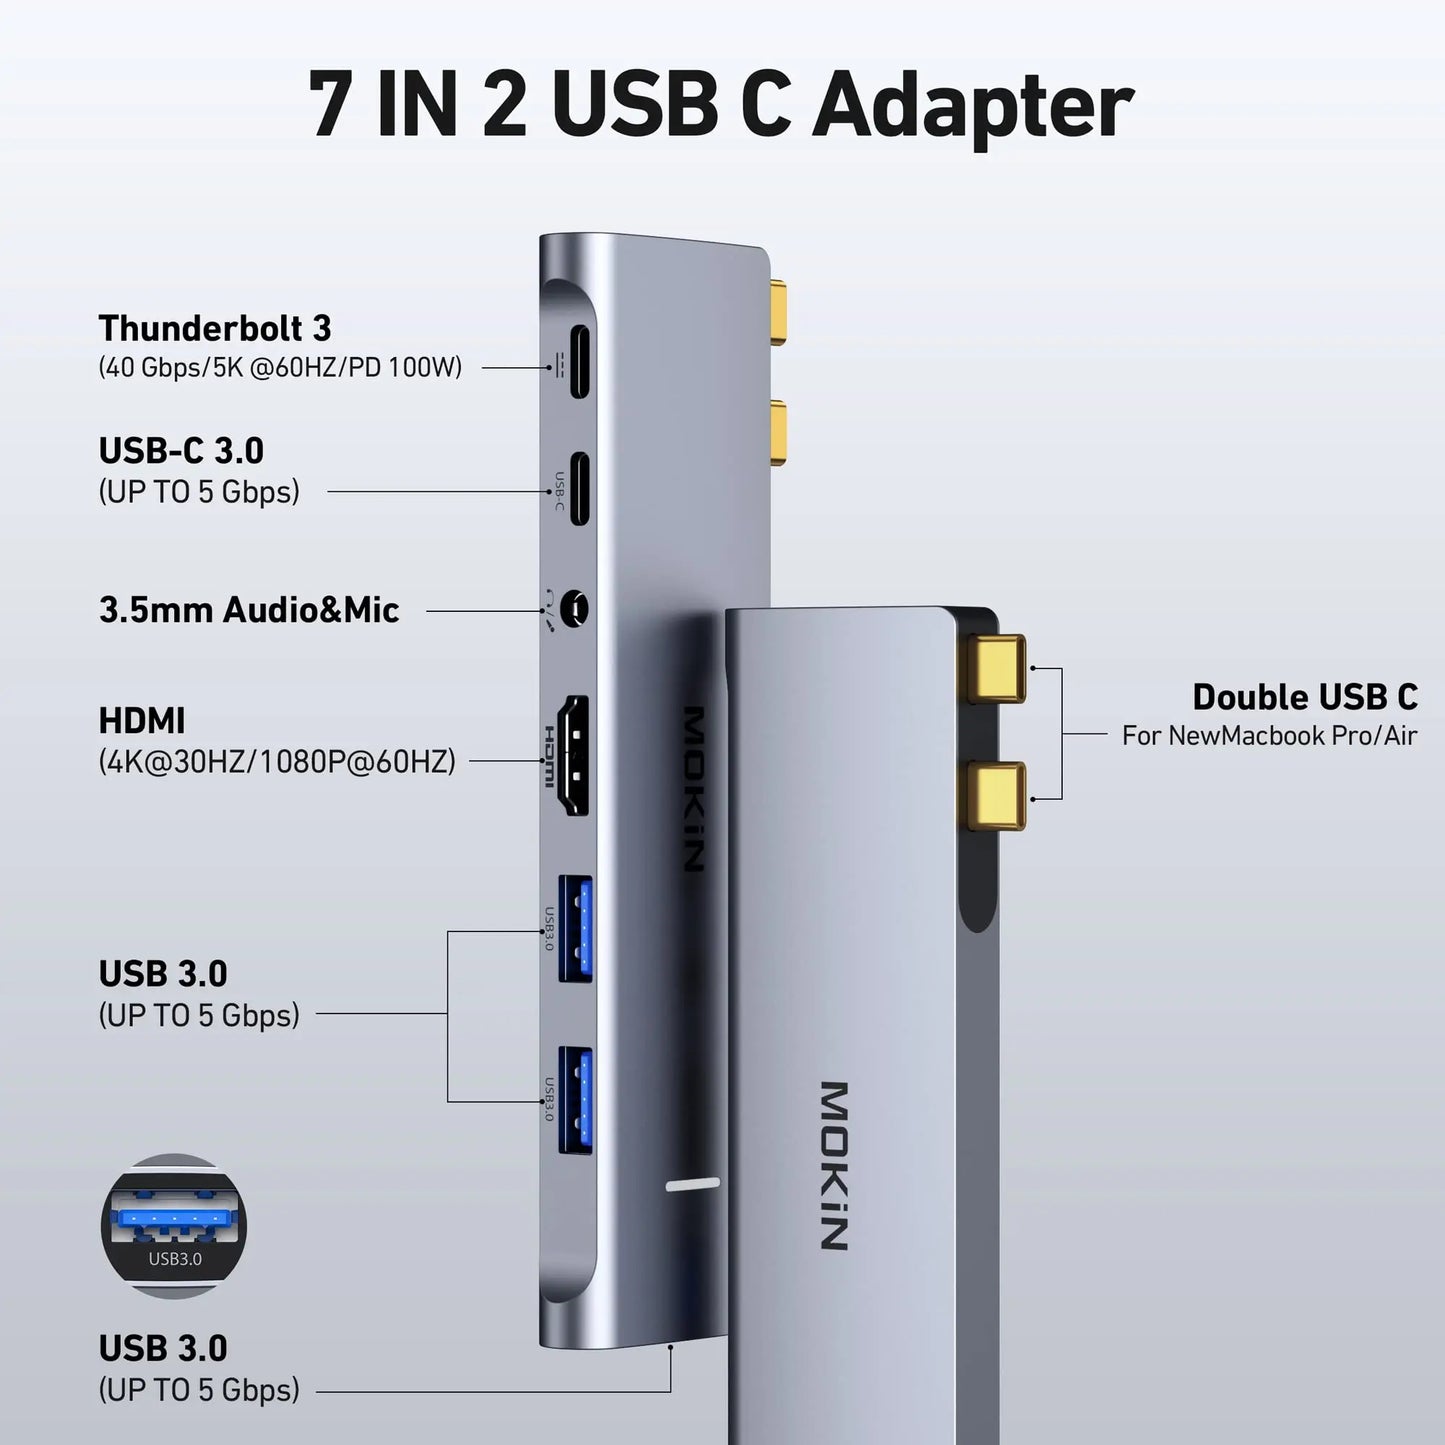 MacBook Pro Adapter,USB C Adapter for MacBook Pro/Air M1M2 2022 2021 2020 13" 15" 16",Mac Dongle with 4K HDMI,3 USB 3.0,USB C - naiveniche